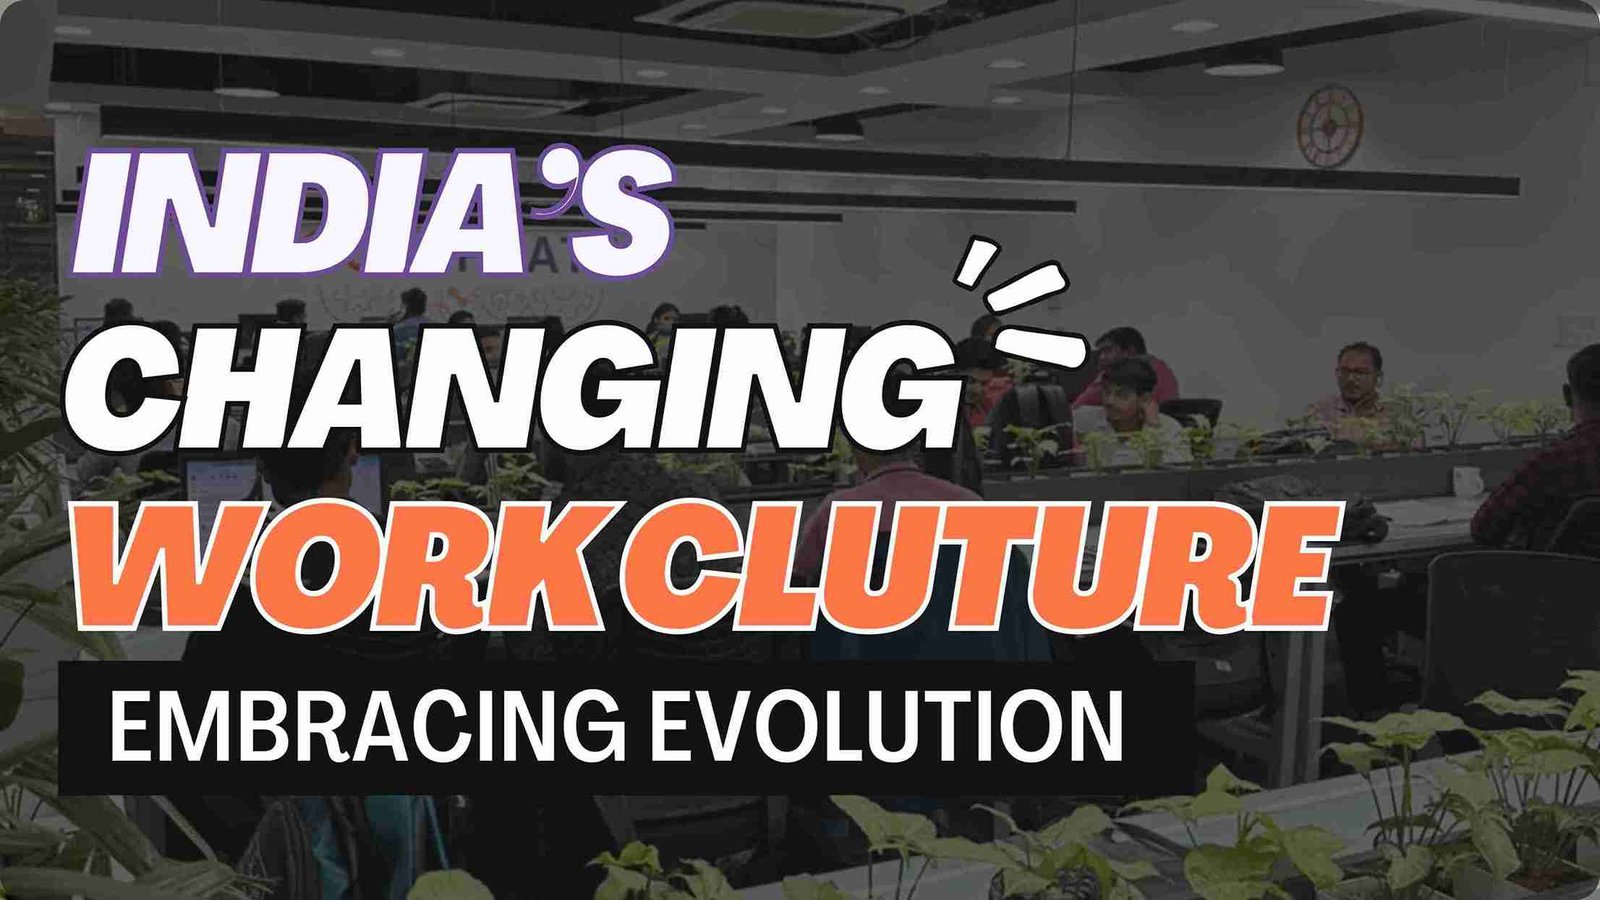 Embracing Evolution: The Changing Work Culture in India